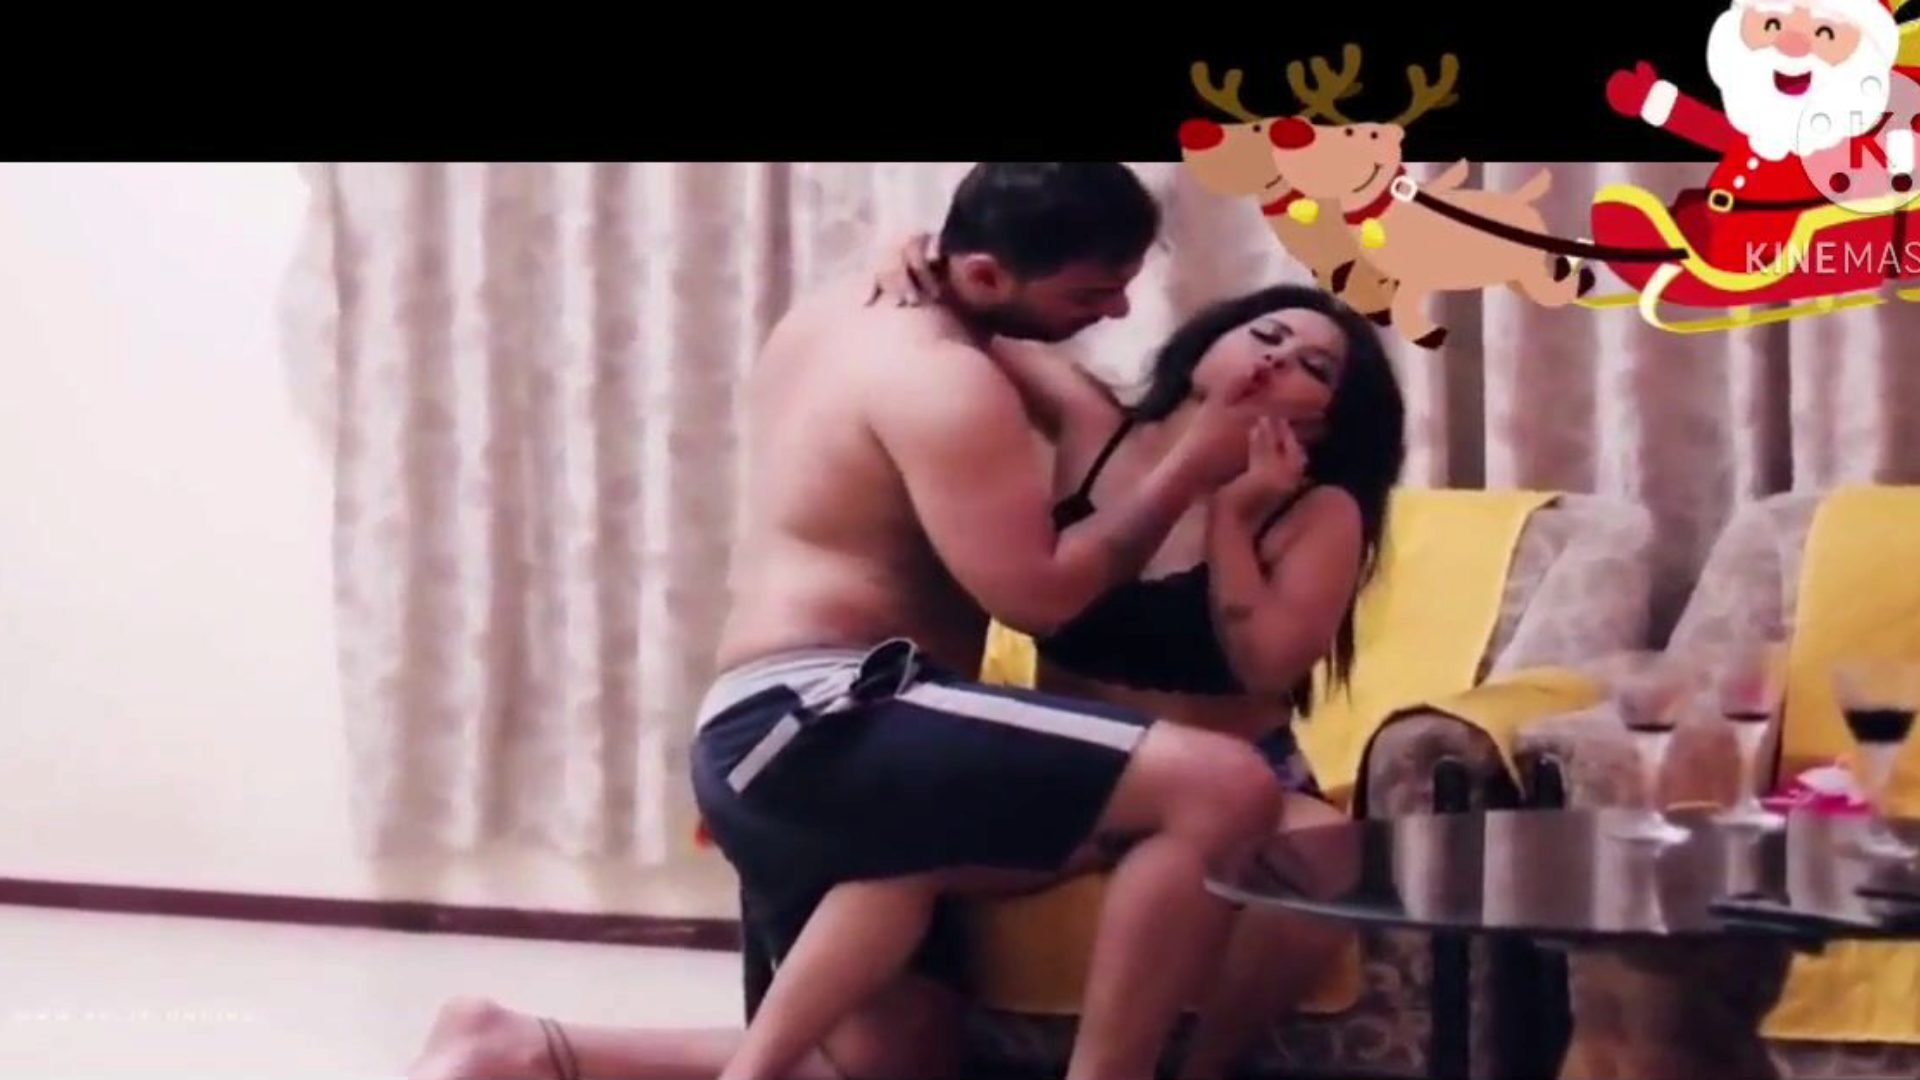 Hottest Indian Couple Best Foreplay N Sex on Floor: Porn 73 Watch Hottest Indian Couple Best Foreplay N Sex on Floor movie scene on xHamster - the ultimate collection of free-for-all Asian Hardcore HD xxx pornography tube episodes